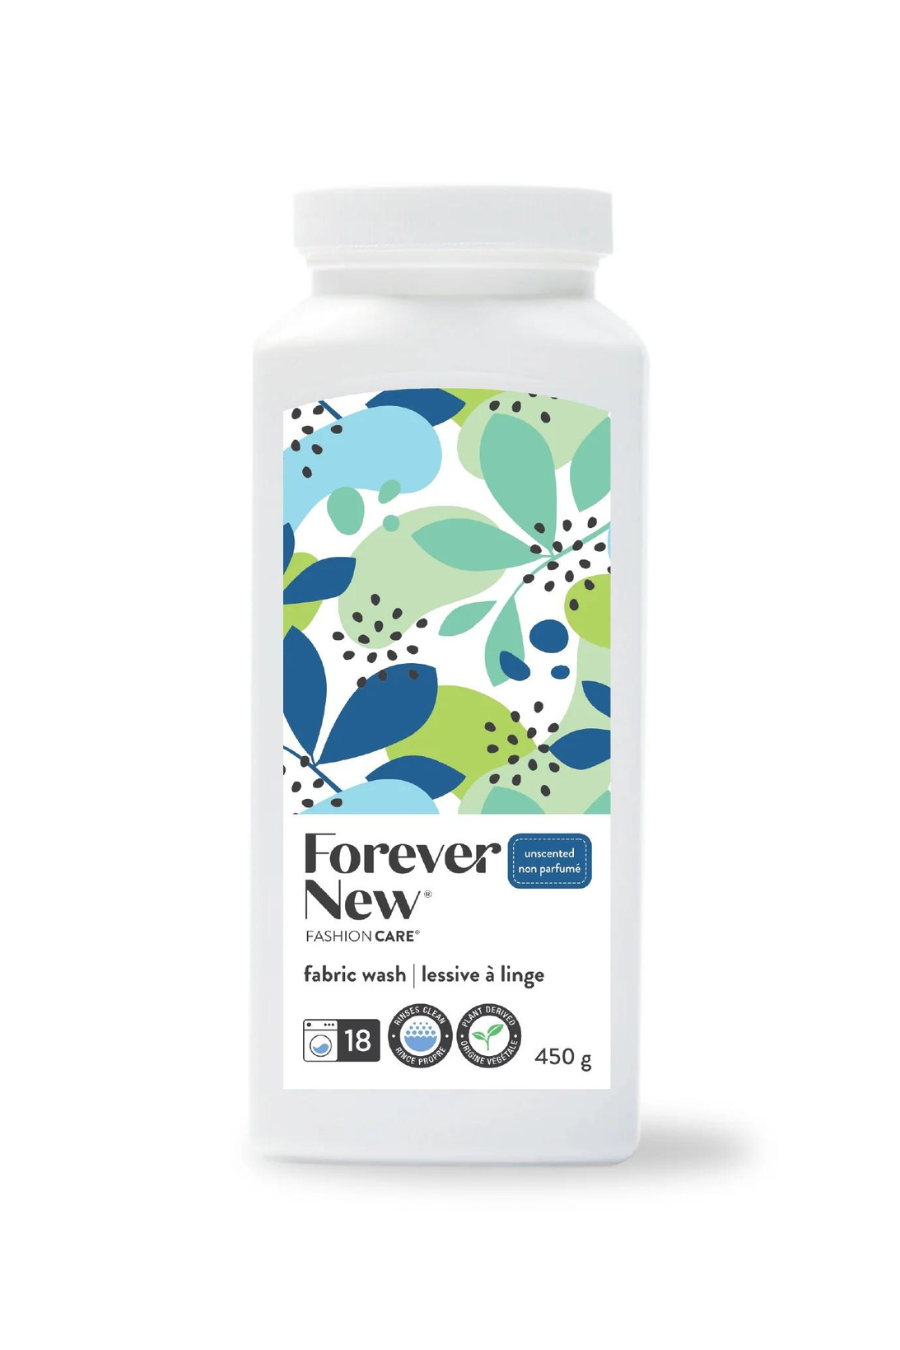 Forever New Laundry Classic Powder Unscented